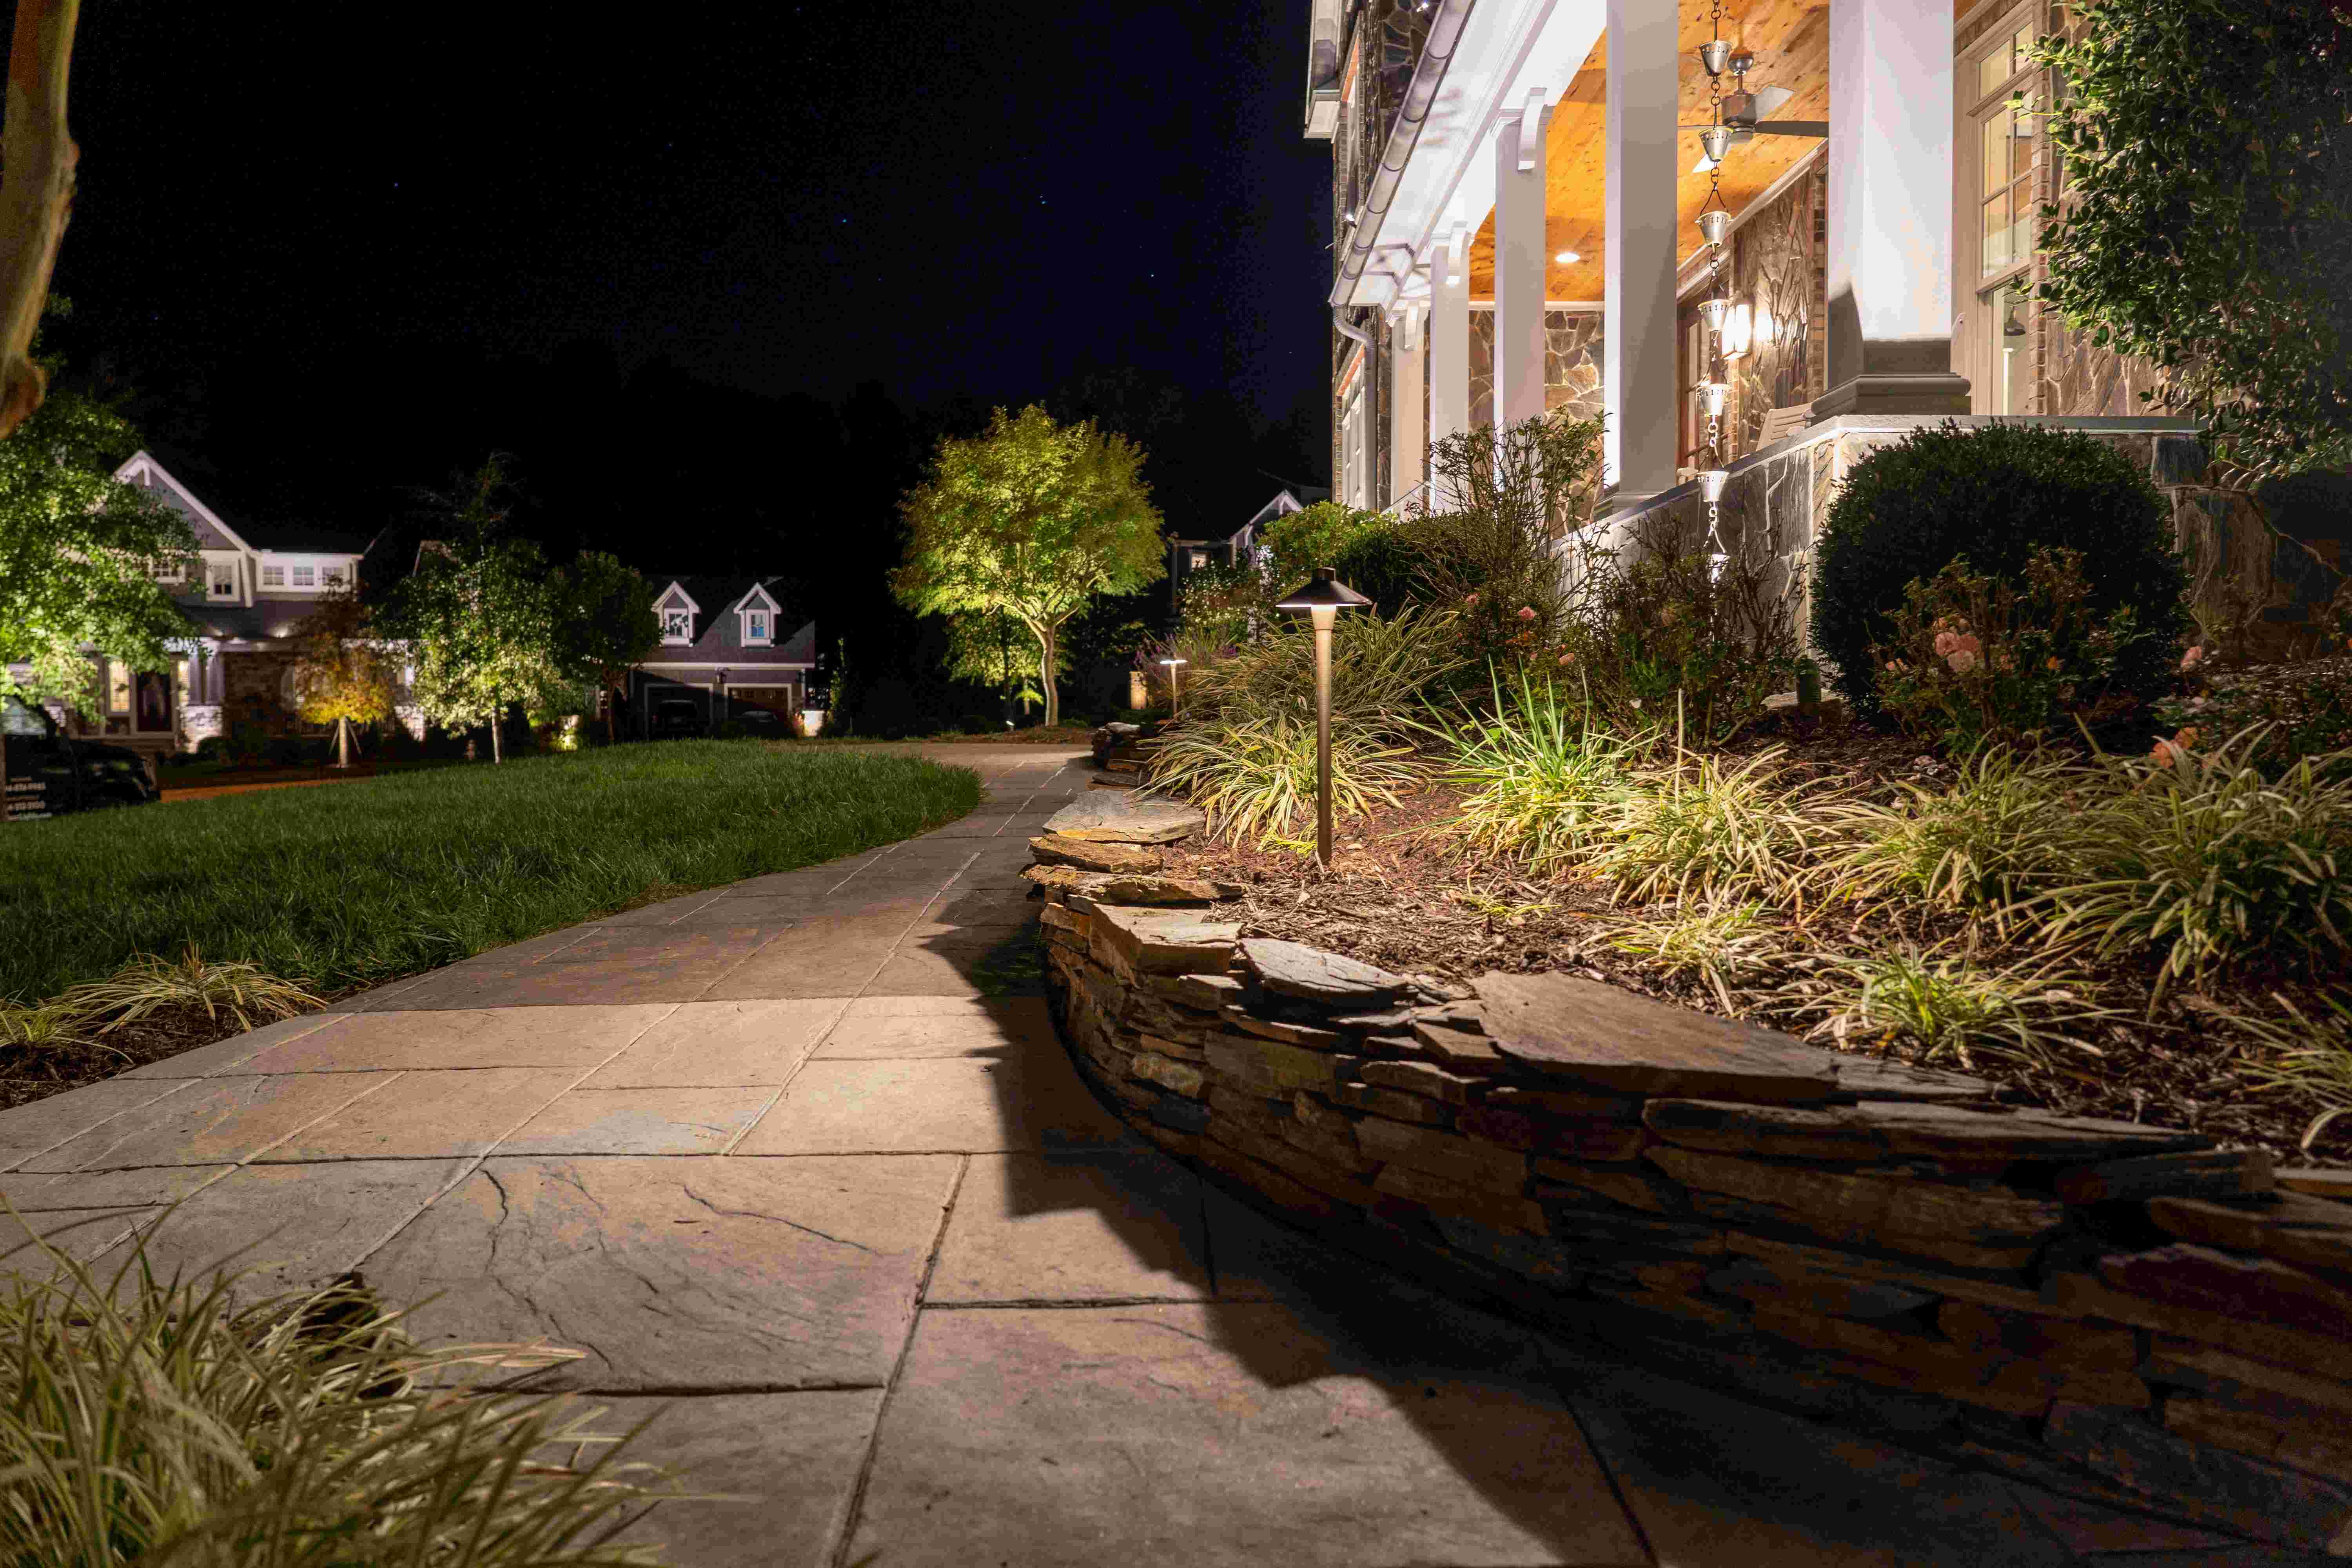 LED lighting in a front yard of a greenvillle home